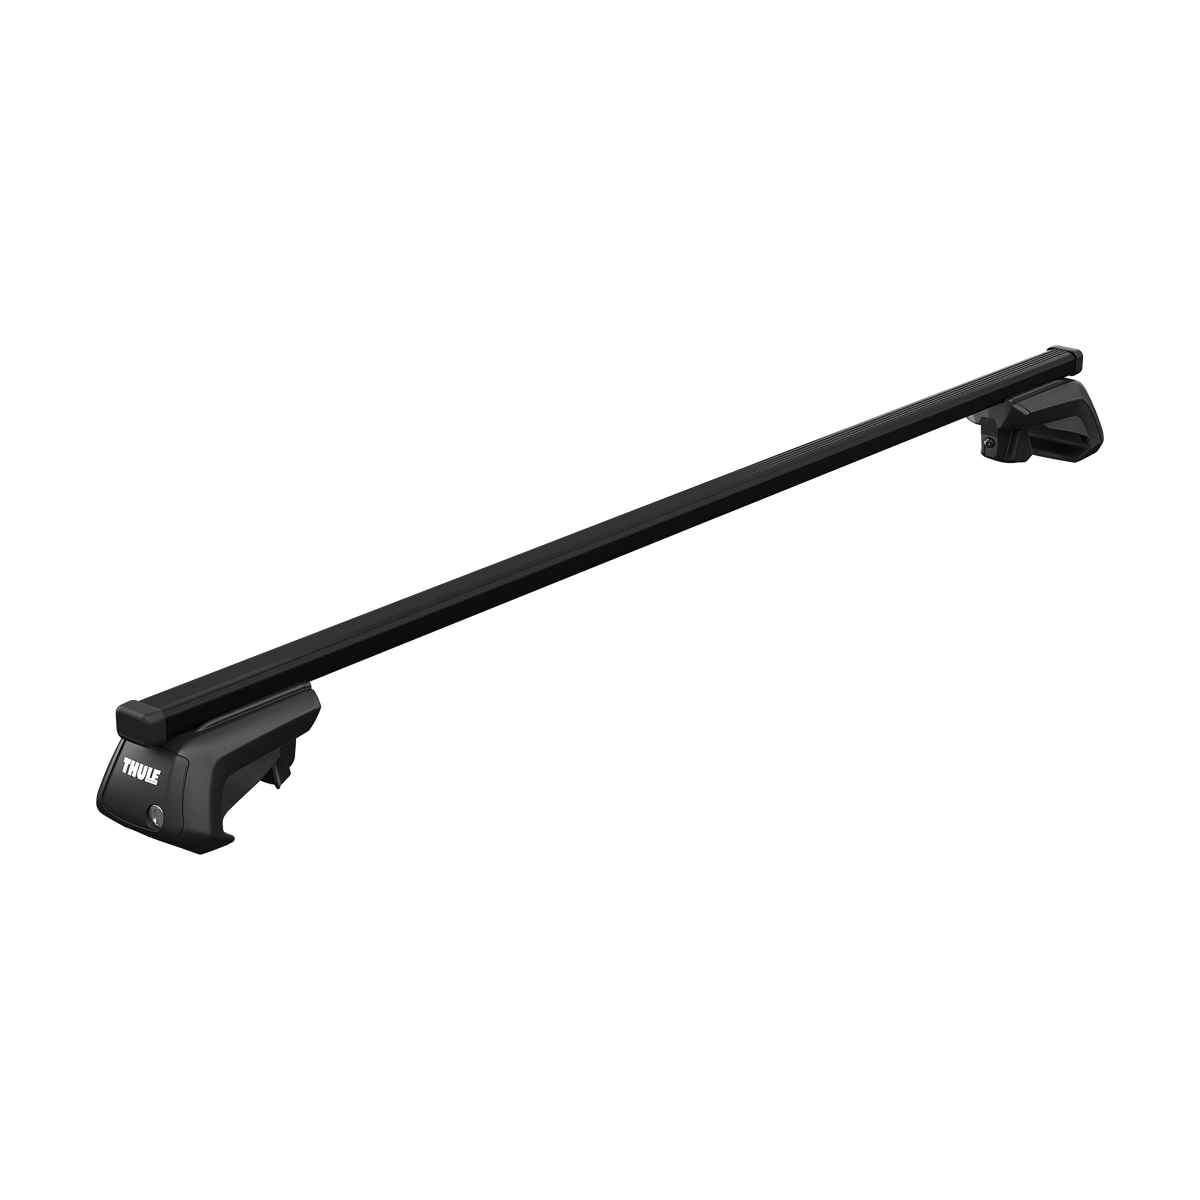 Thule SmartRack XT SquareBar complete roof rack system